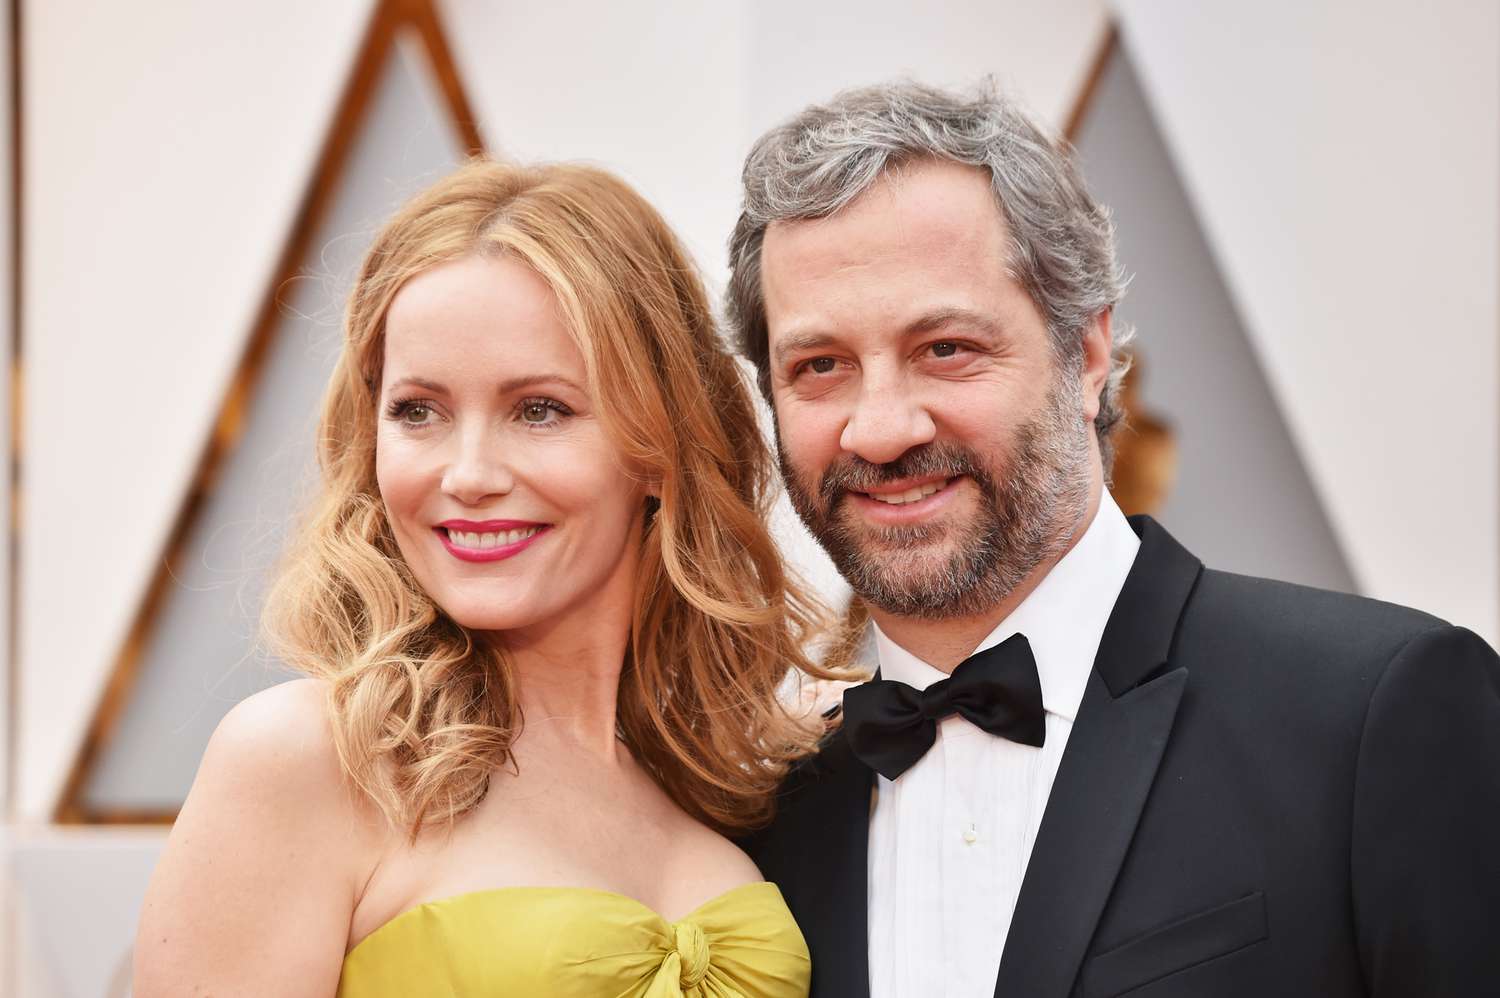 Judd Apatow and his wife, Leslie Mann